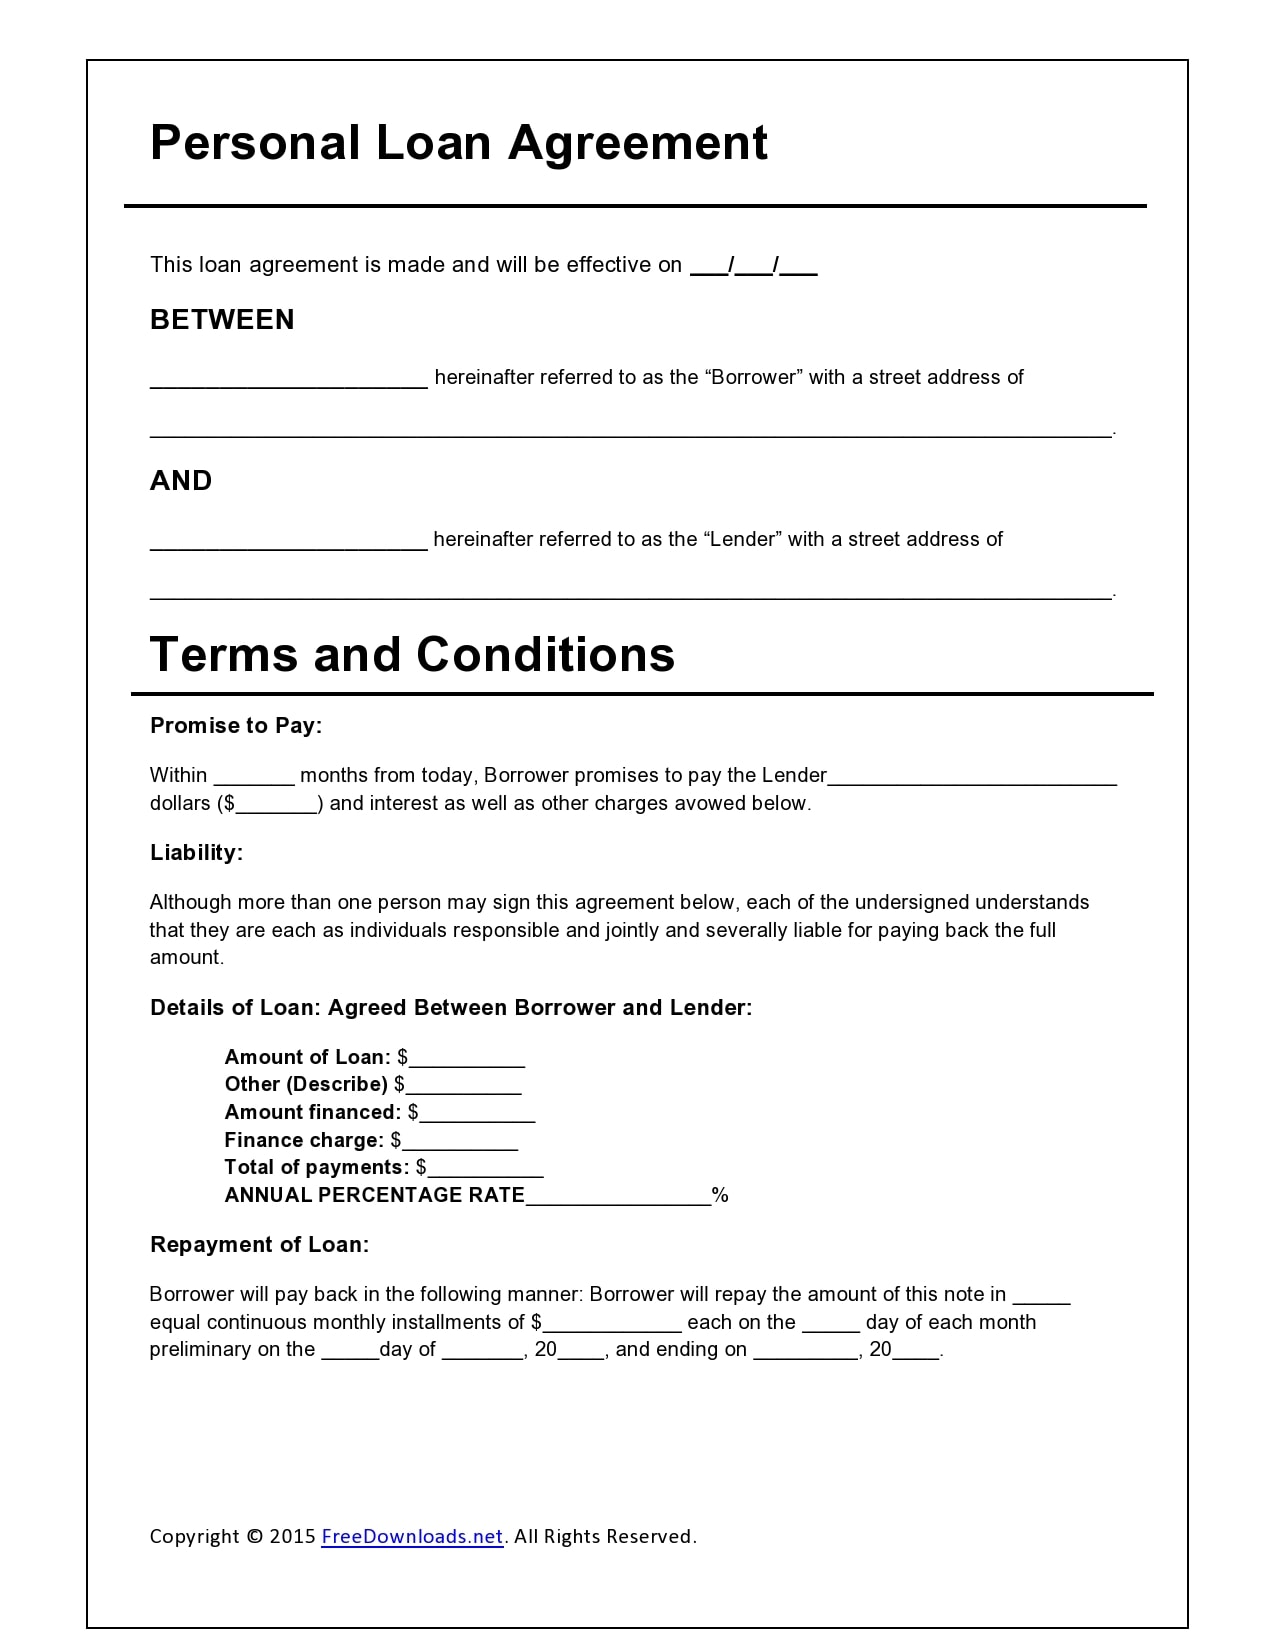 21 Simple Family Loan Agreement Templates (21% Free) In long term loan agreement template